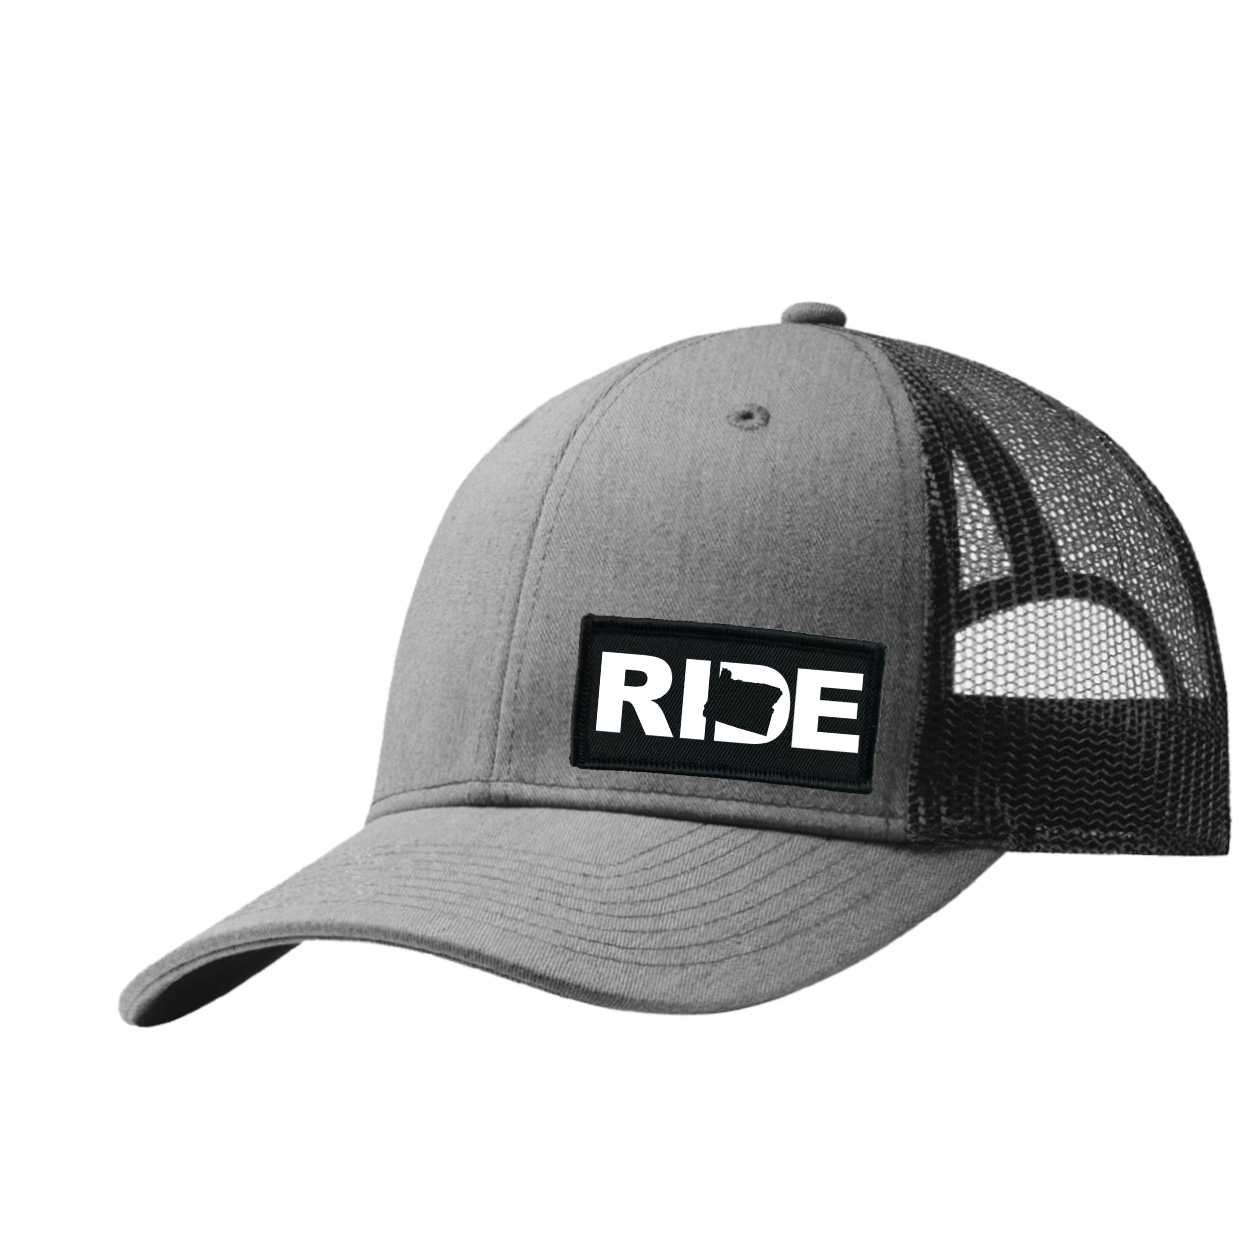 Ride Oregon Night Out Woven Patch Snapback Trucker Hat Heather Gray/Black (White Logo)